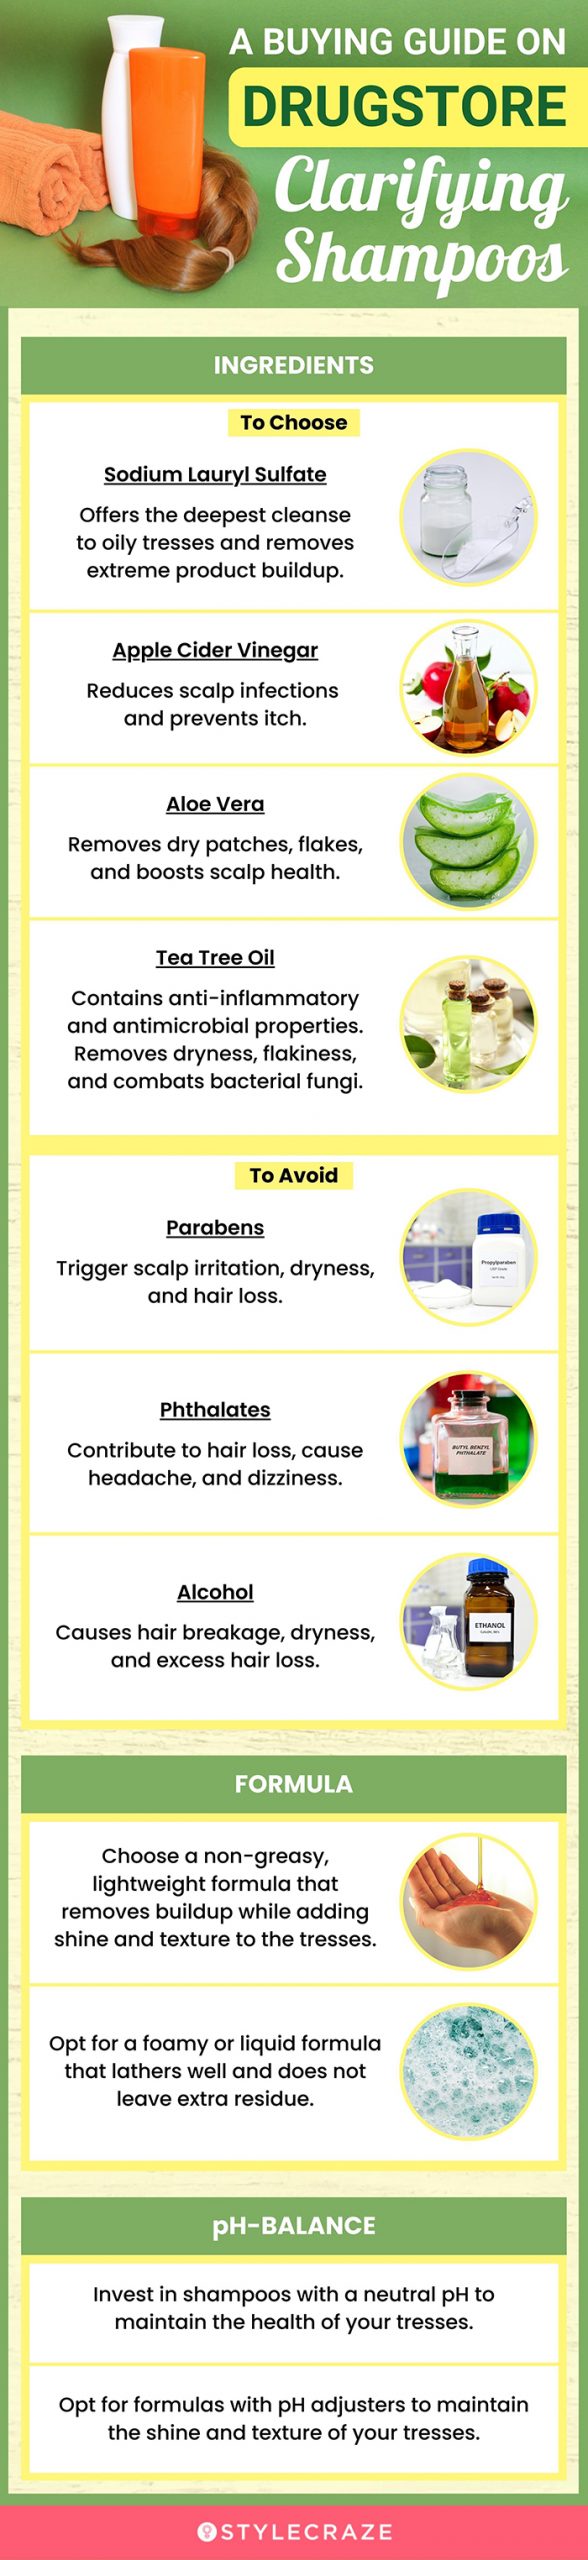 A Buying Guide On Drugstore Clarifying Shampoos (infographic)